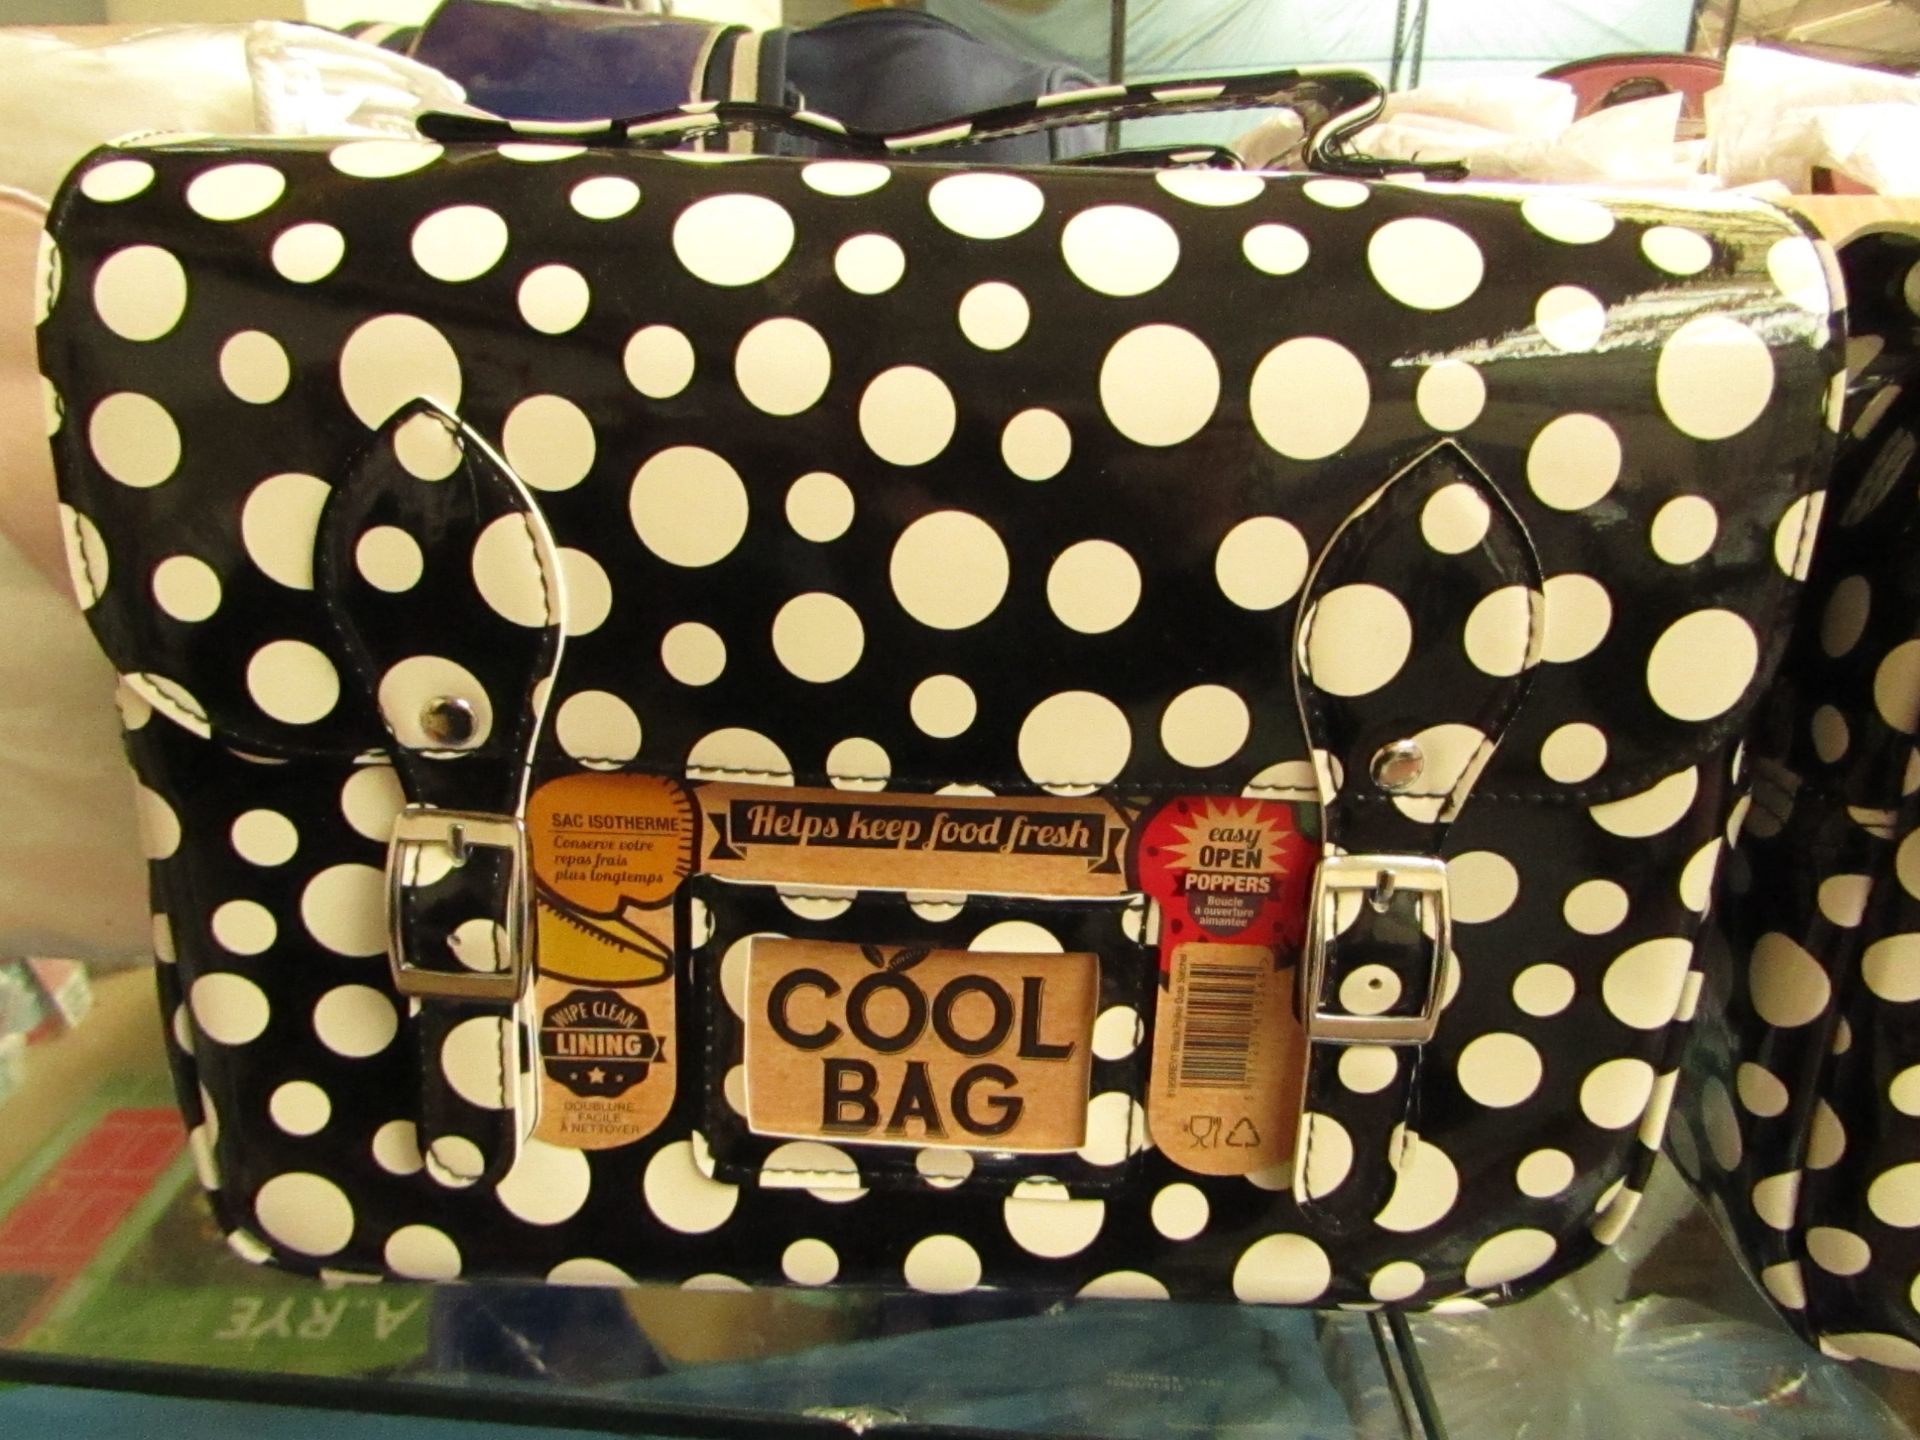 Cool Bag - Easy Open (Pocka Dot Design (Black & White) - All Look New, With Original Tags.